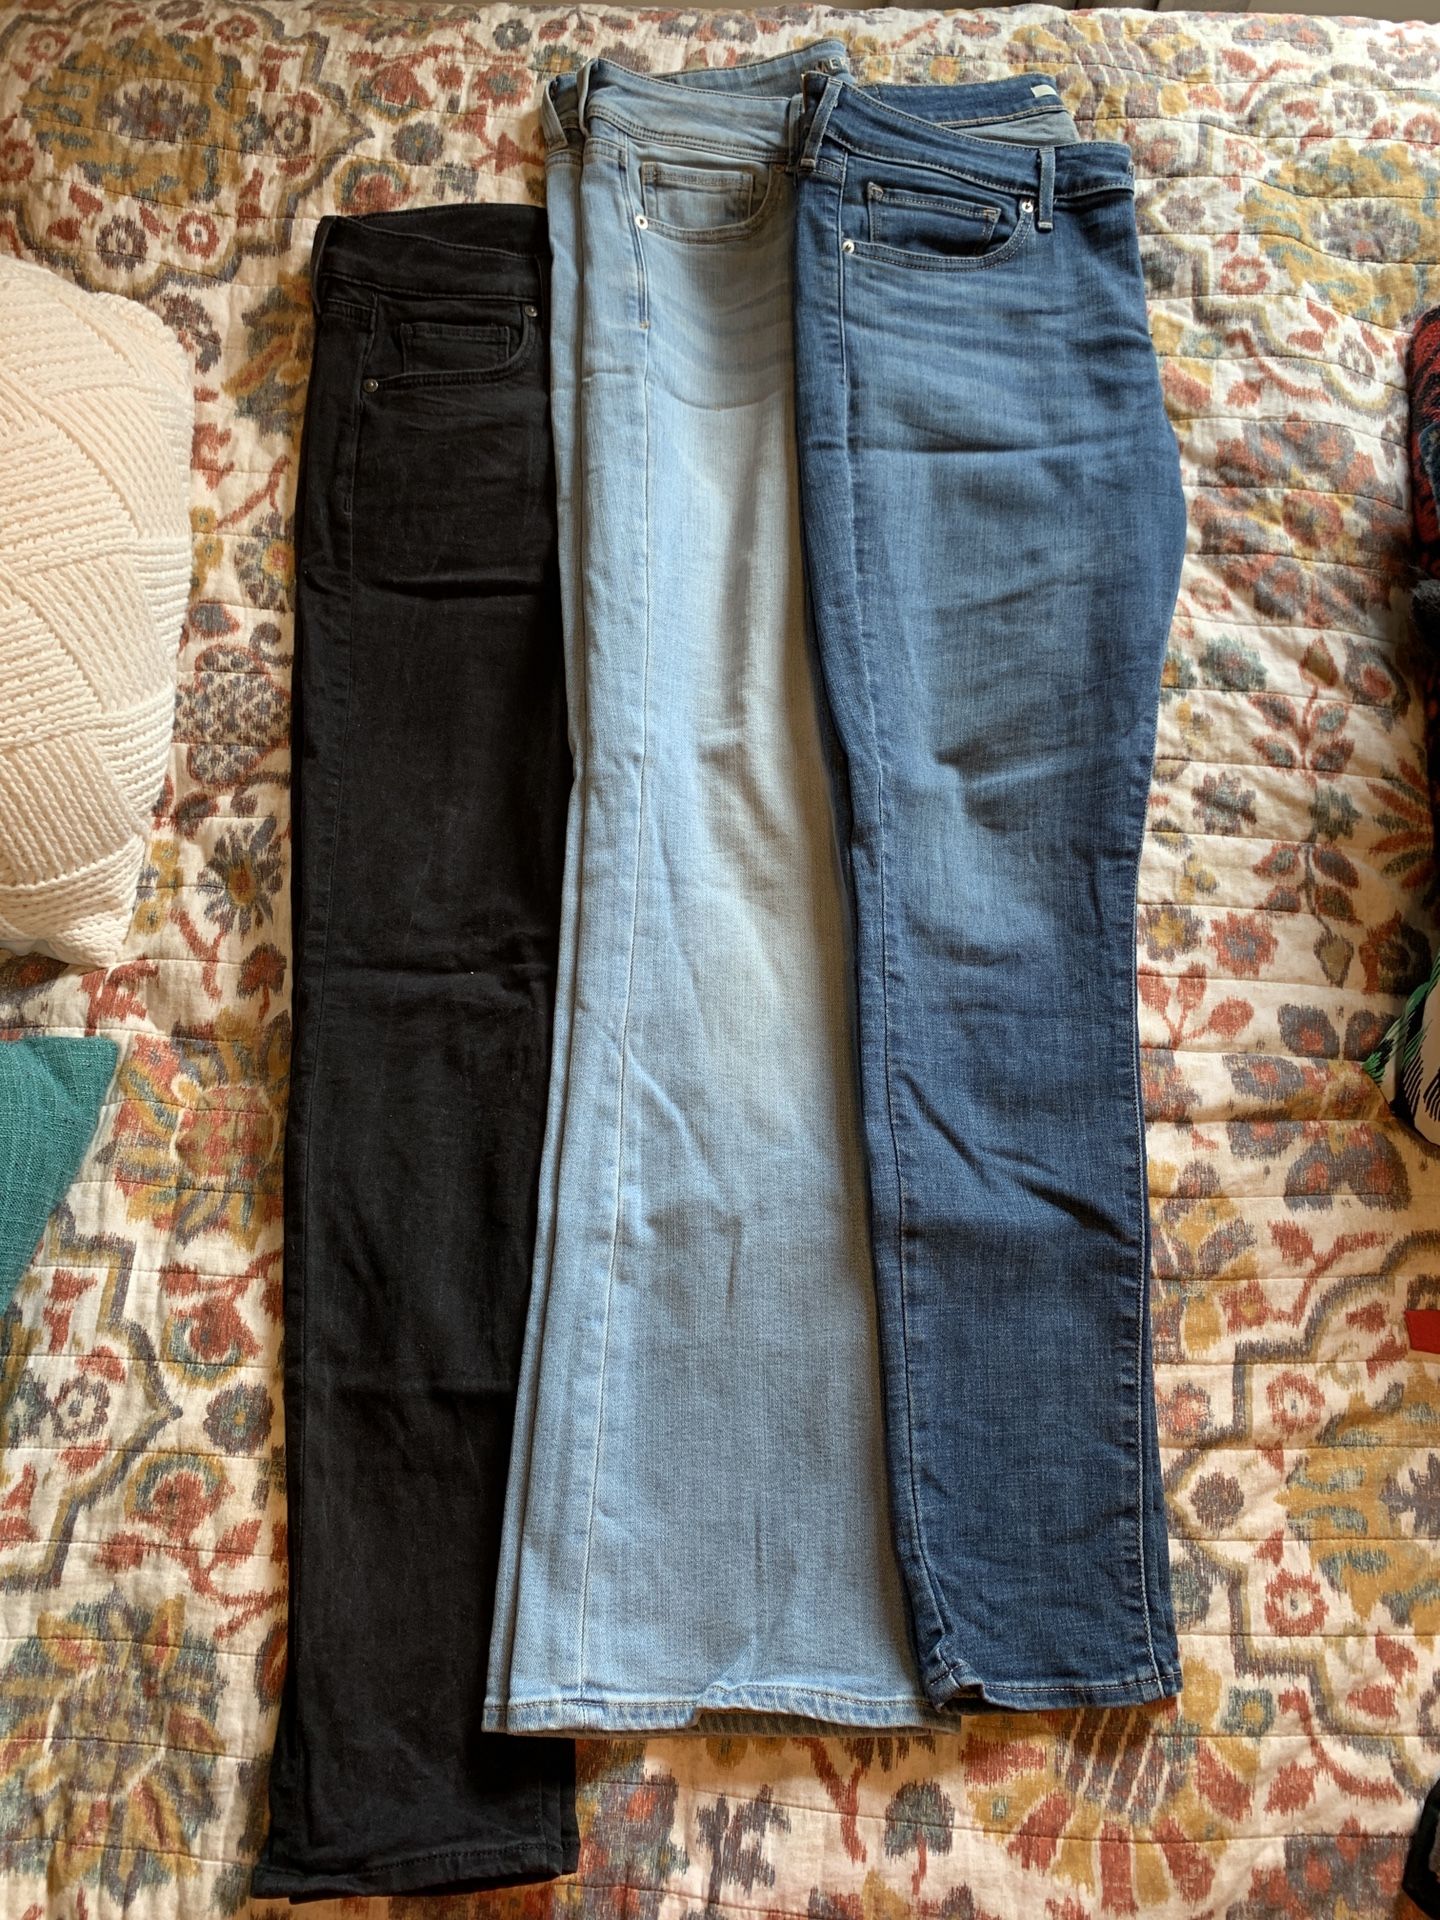 Jeans and Dress Pants